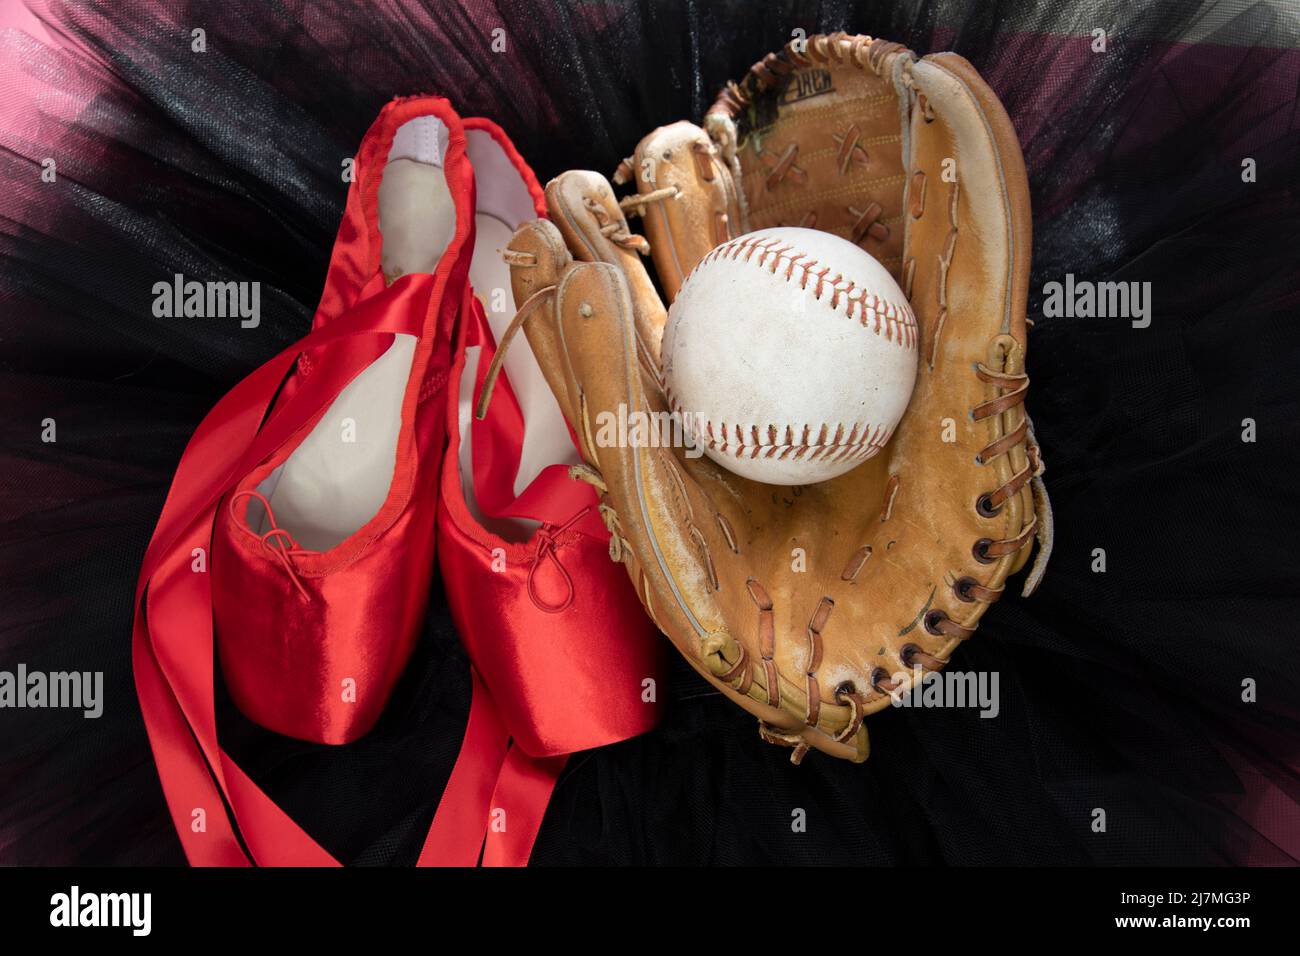 Softball glove, ball, and ballet shoes on a black tutu. Stock Photo